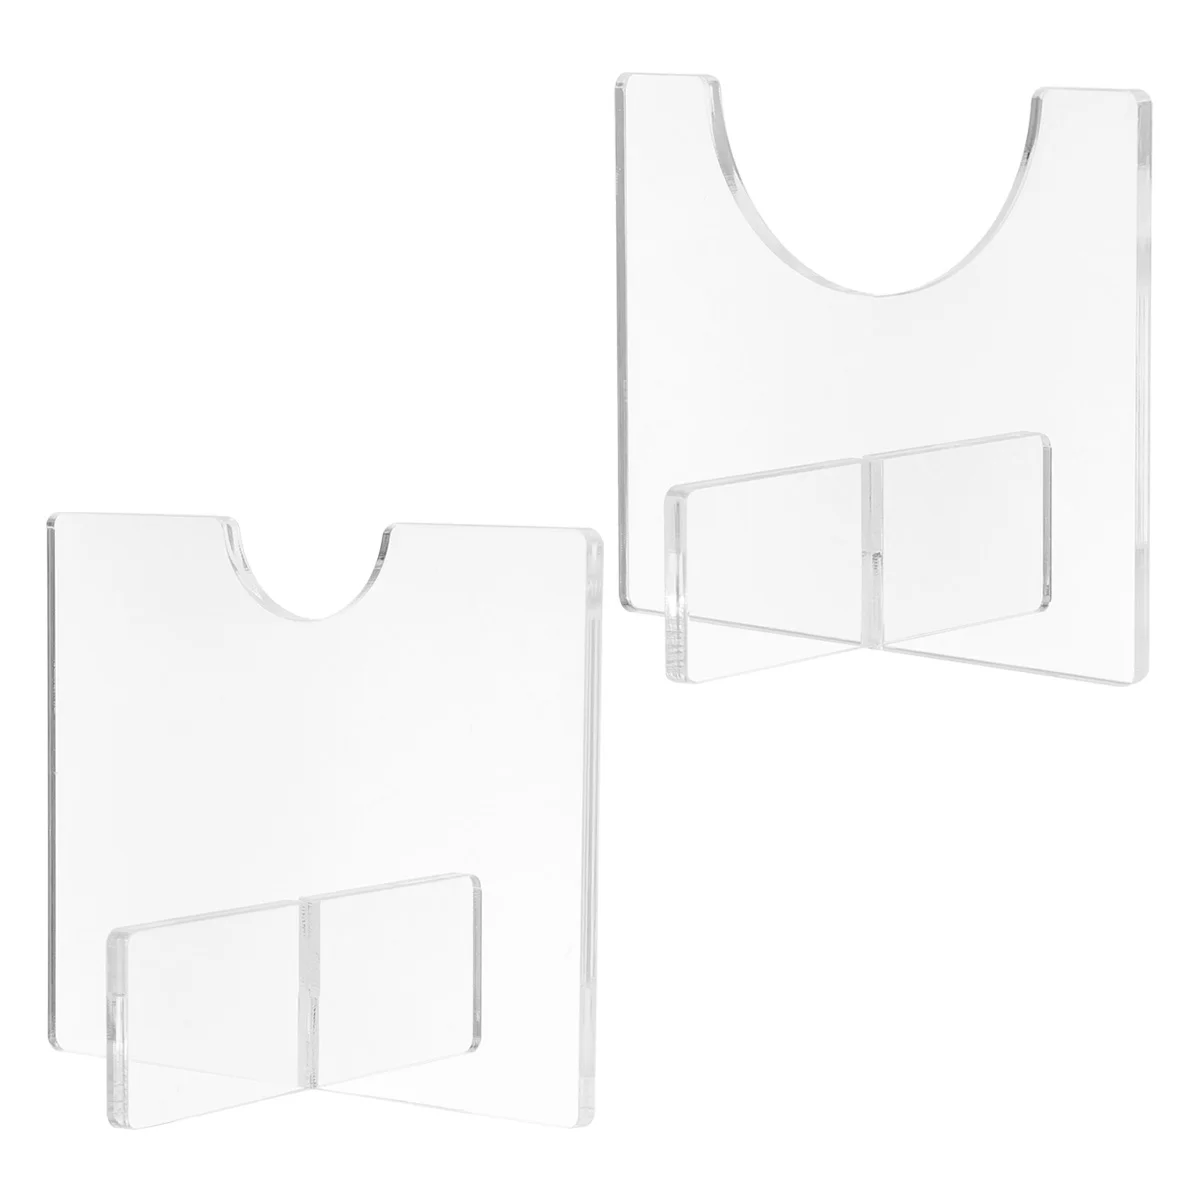 

2 Pcs Baseball Stand Bat Display Holder Wall Shelves Single Support Acrylic Clothes Hangers Cue